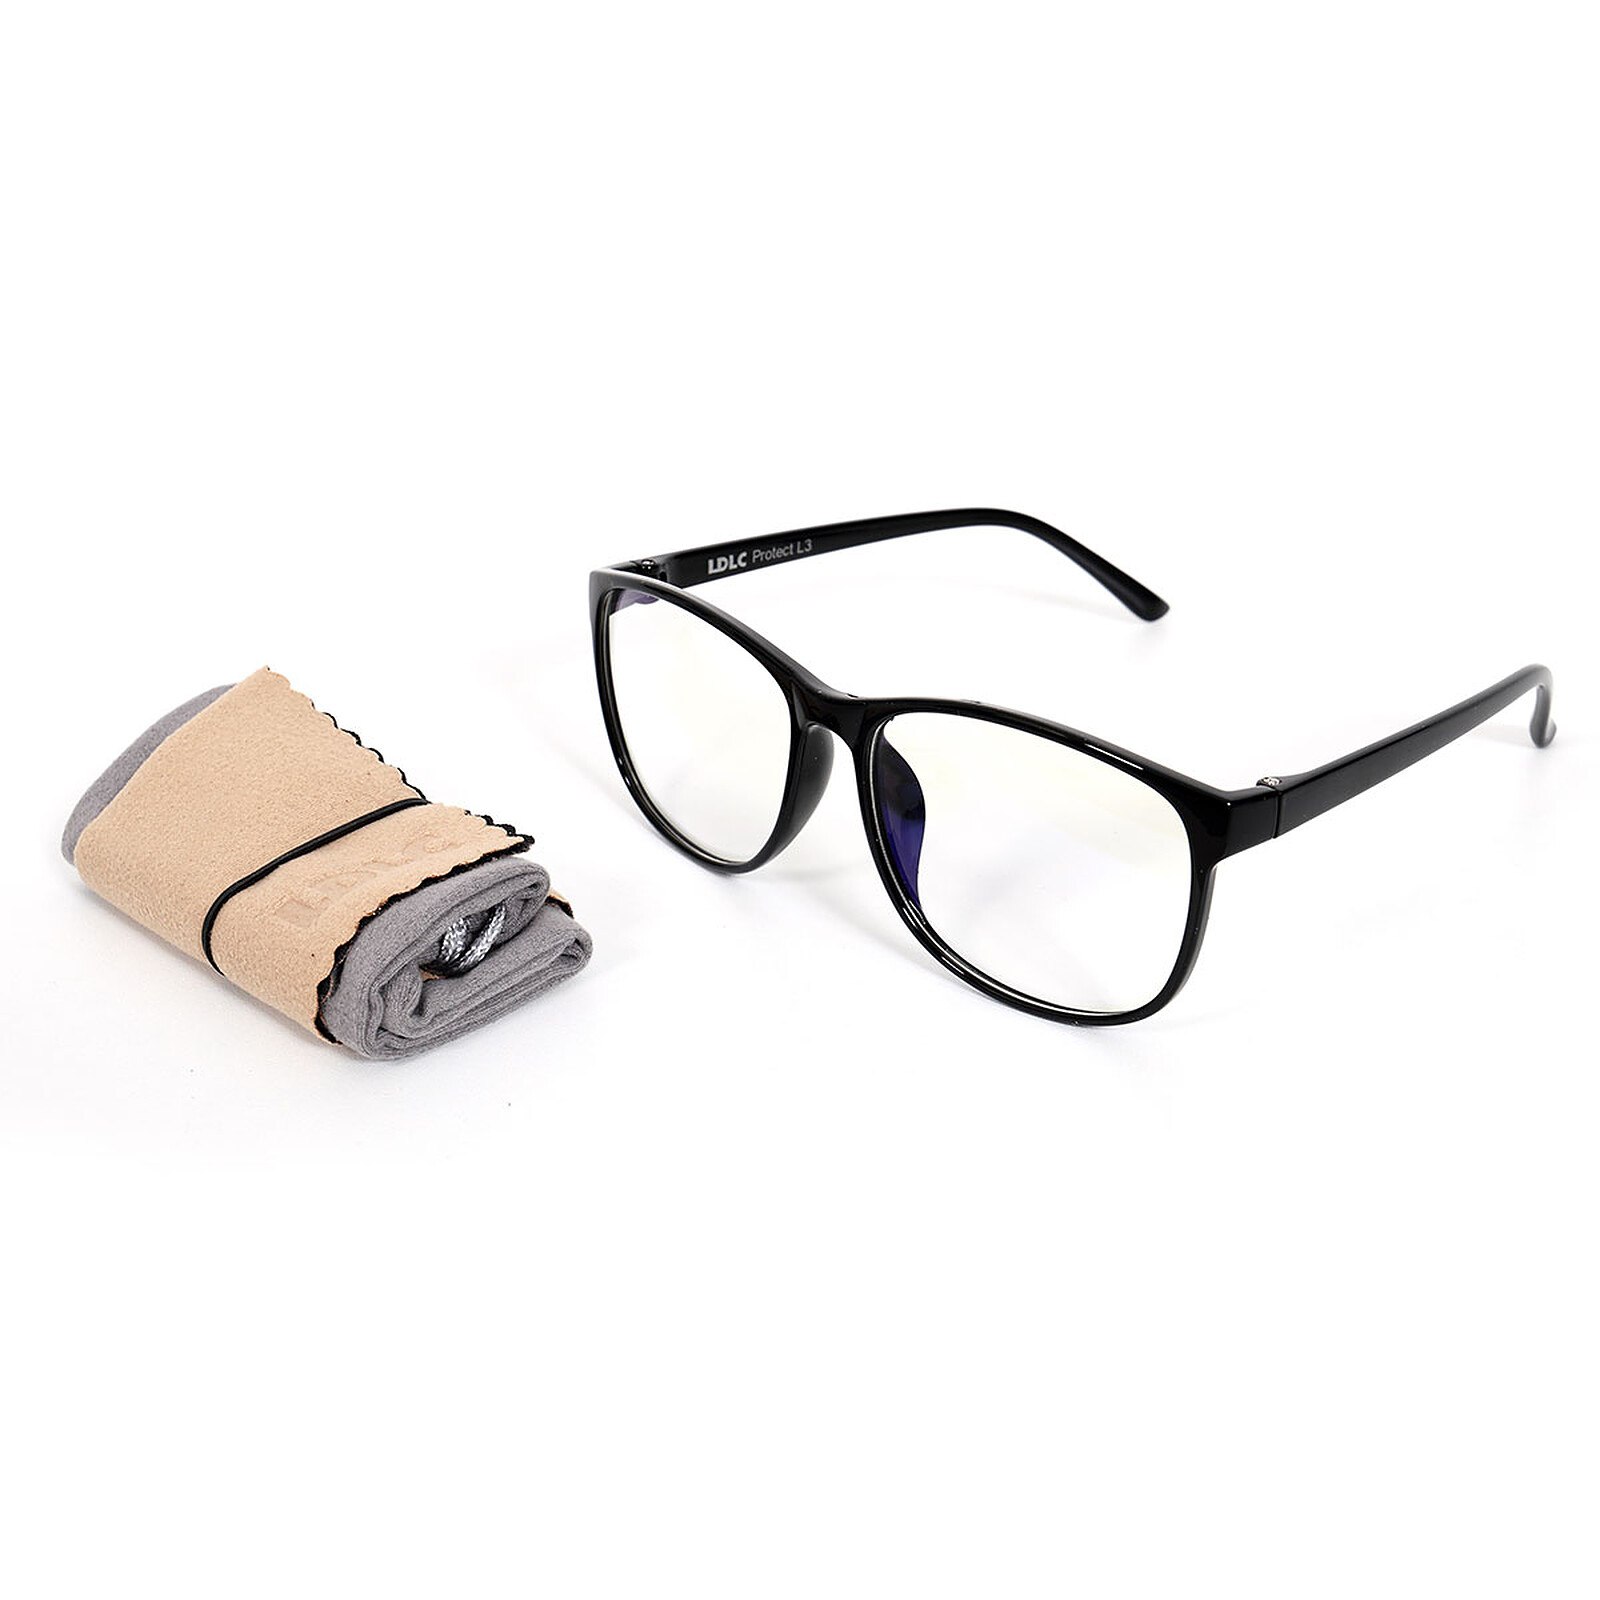 LDLC Protect-L3 - Computer glasses - LDLC 3-year warranty | Holy Moley